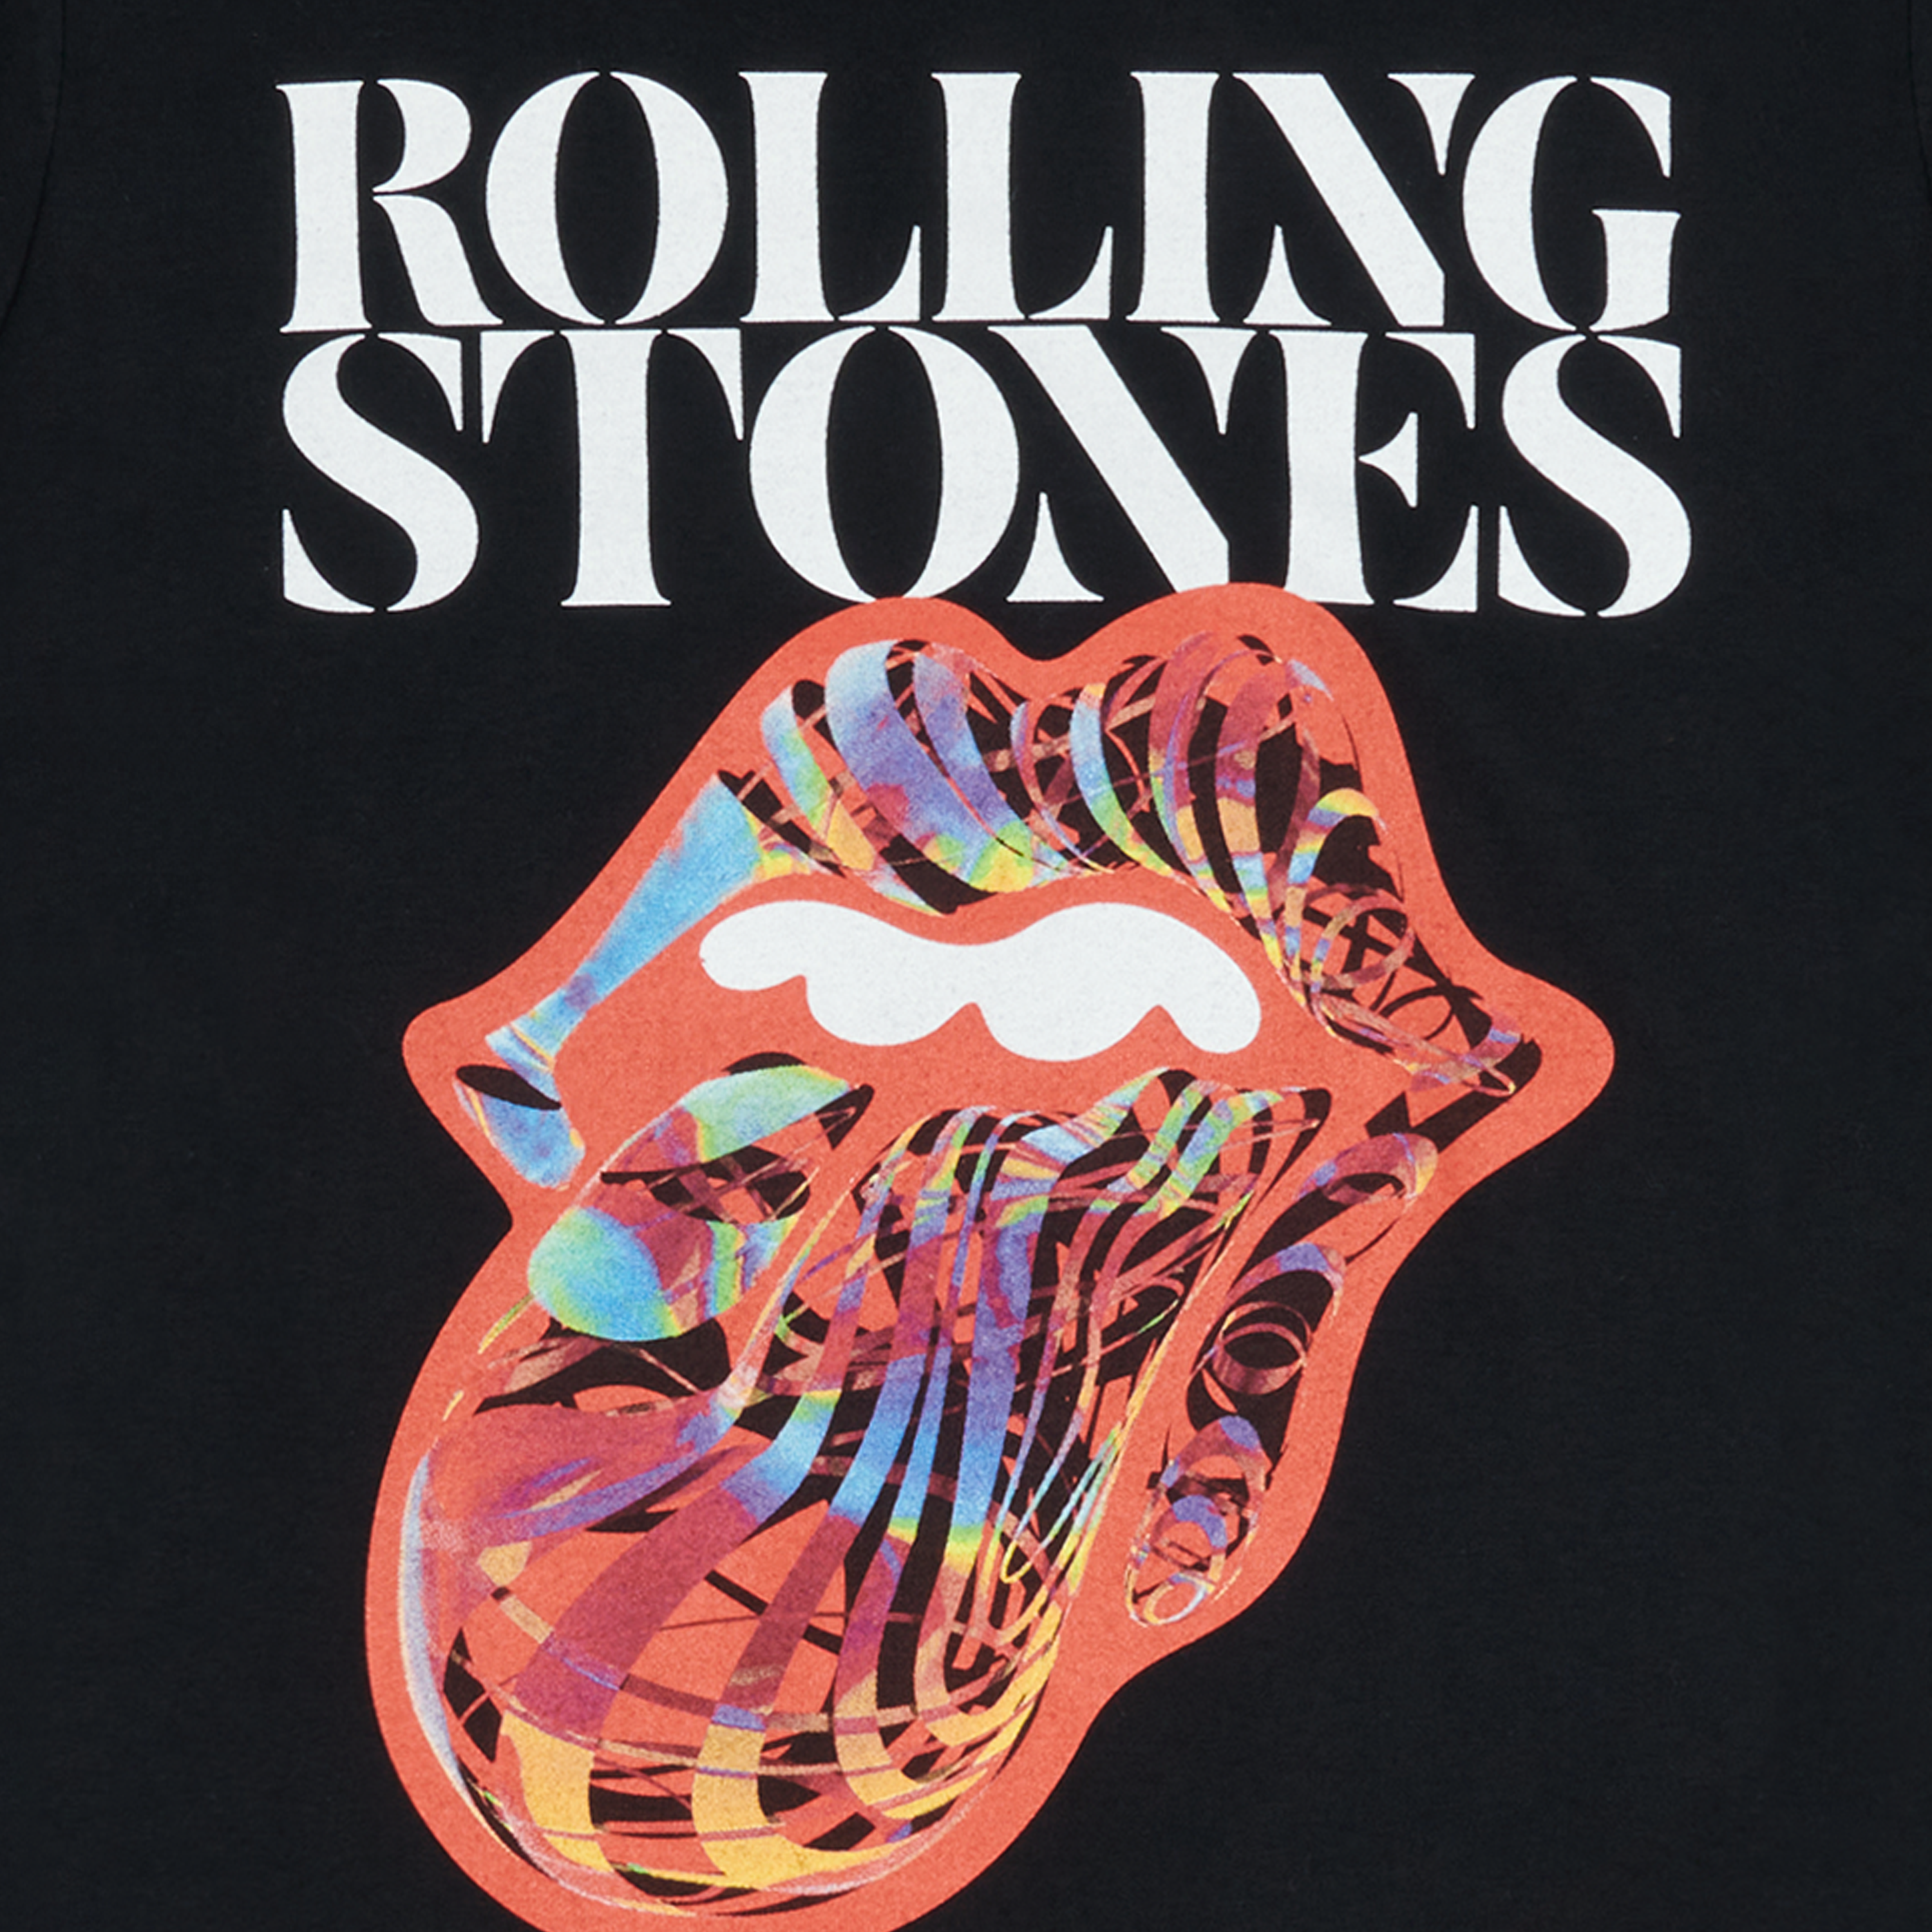 The Rolling Stones - Sixty Cyberdelic Womens Tour T-Shirt